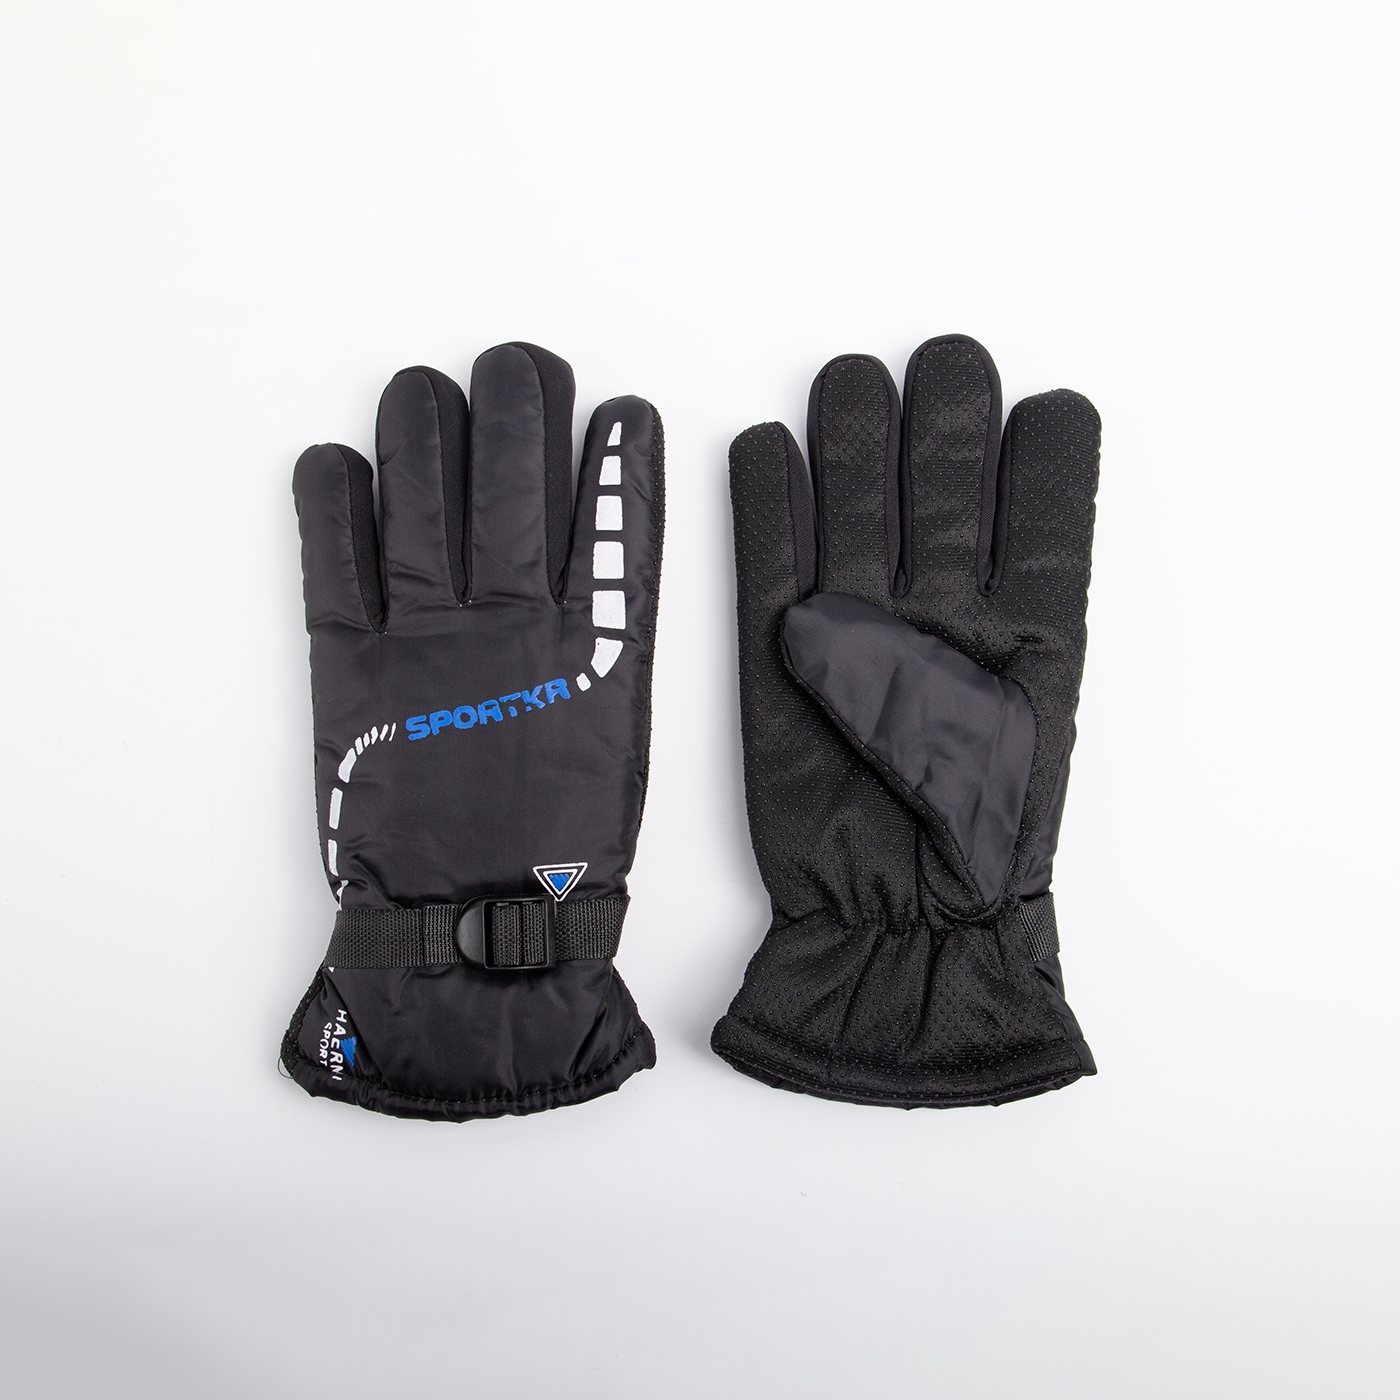 Outdoor Sports Windproof Warm Gloves3